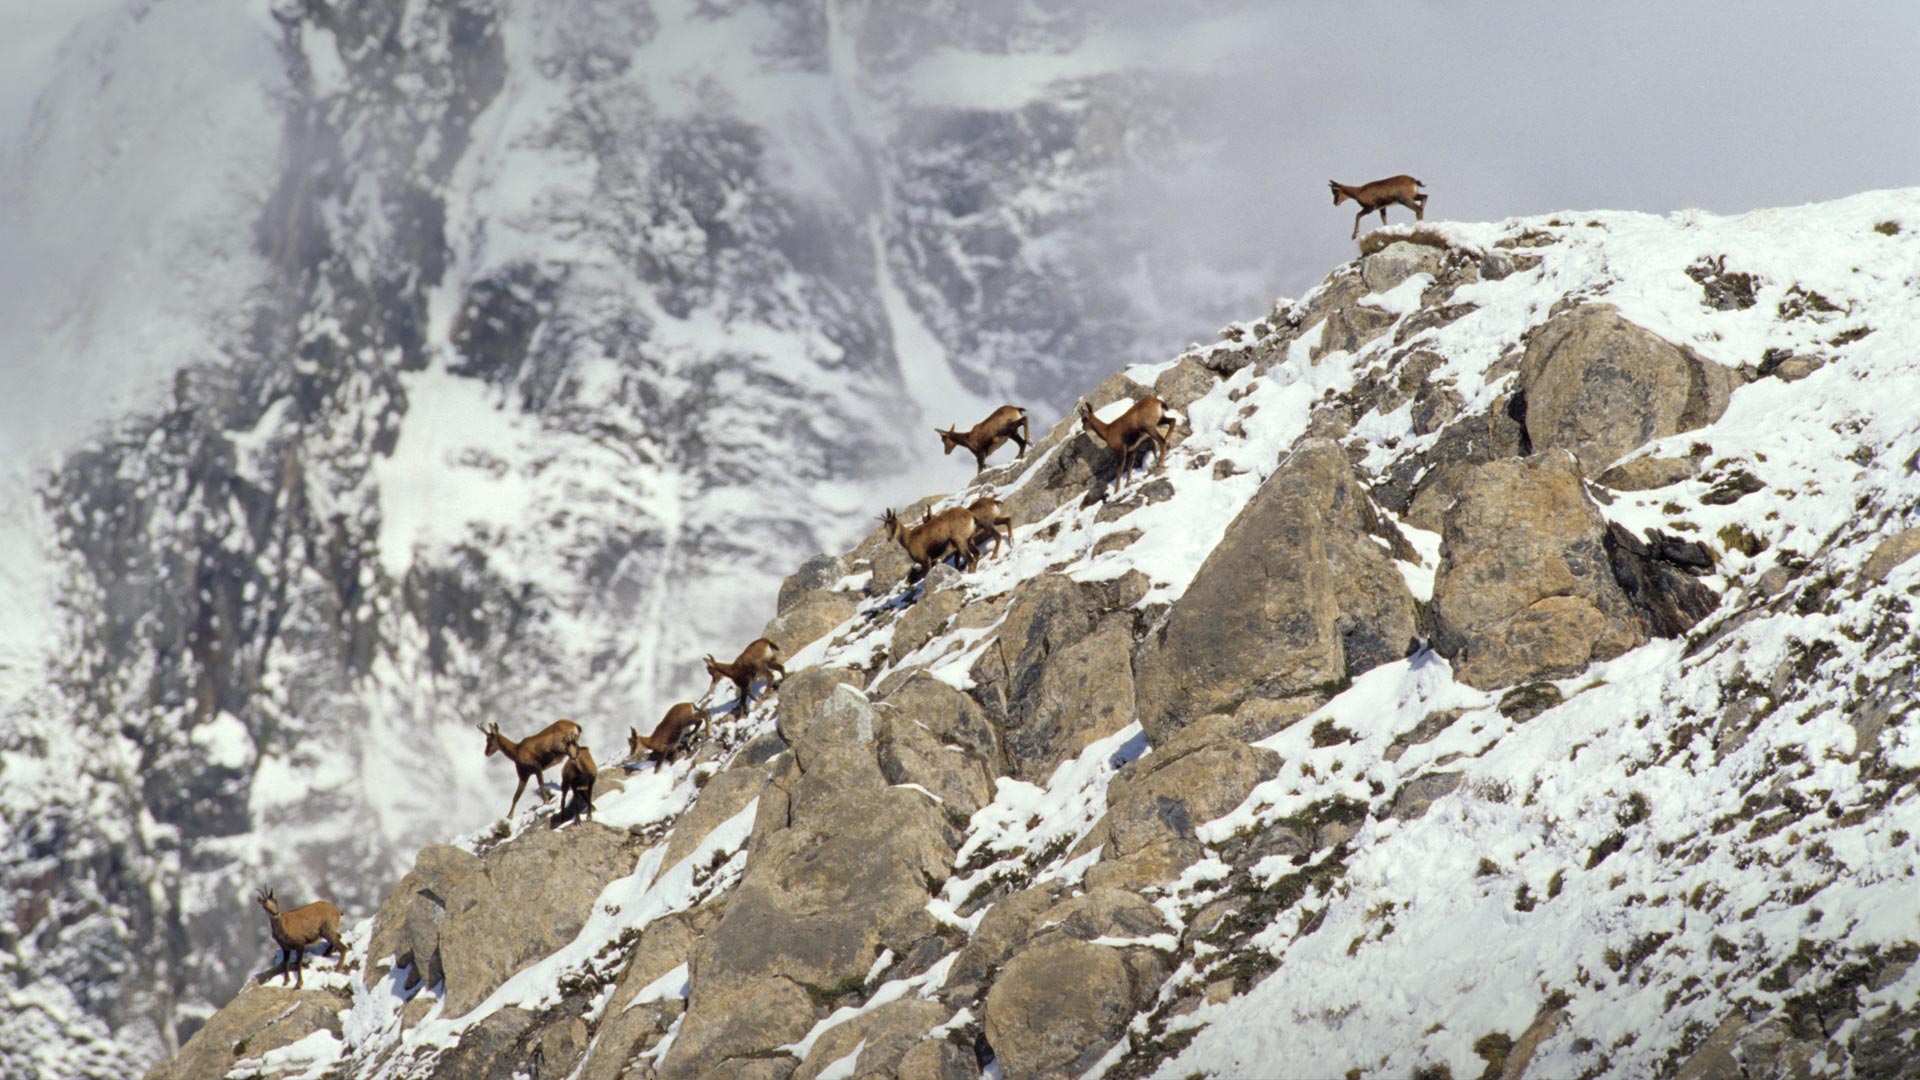 Chamois of Winter Mountain France, The Pyrenees by BalochDesign on ...